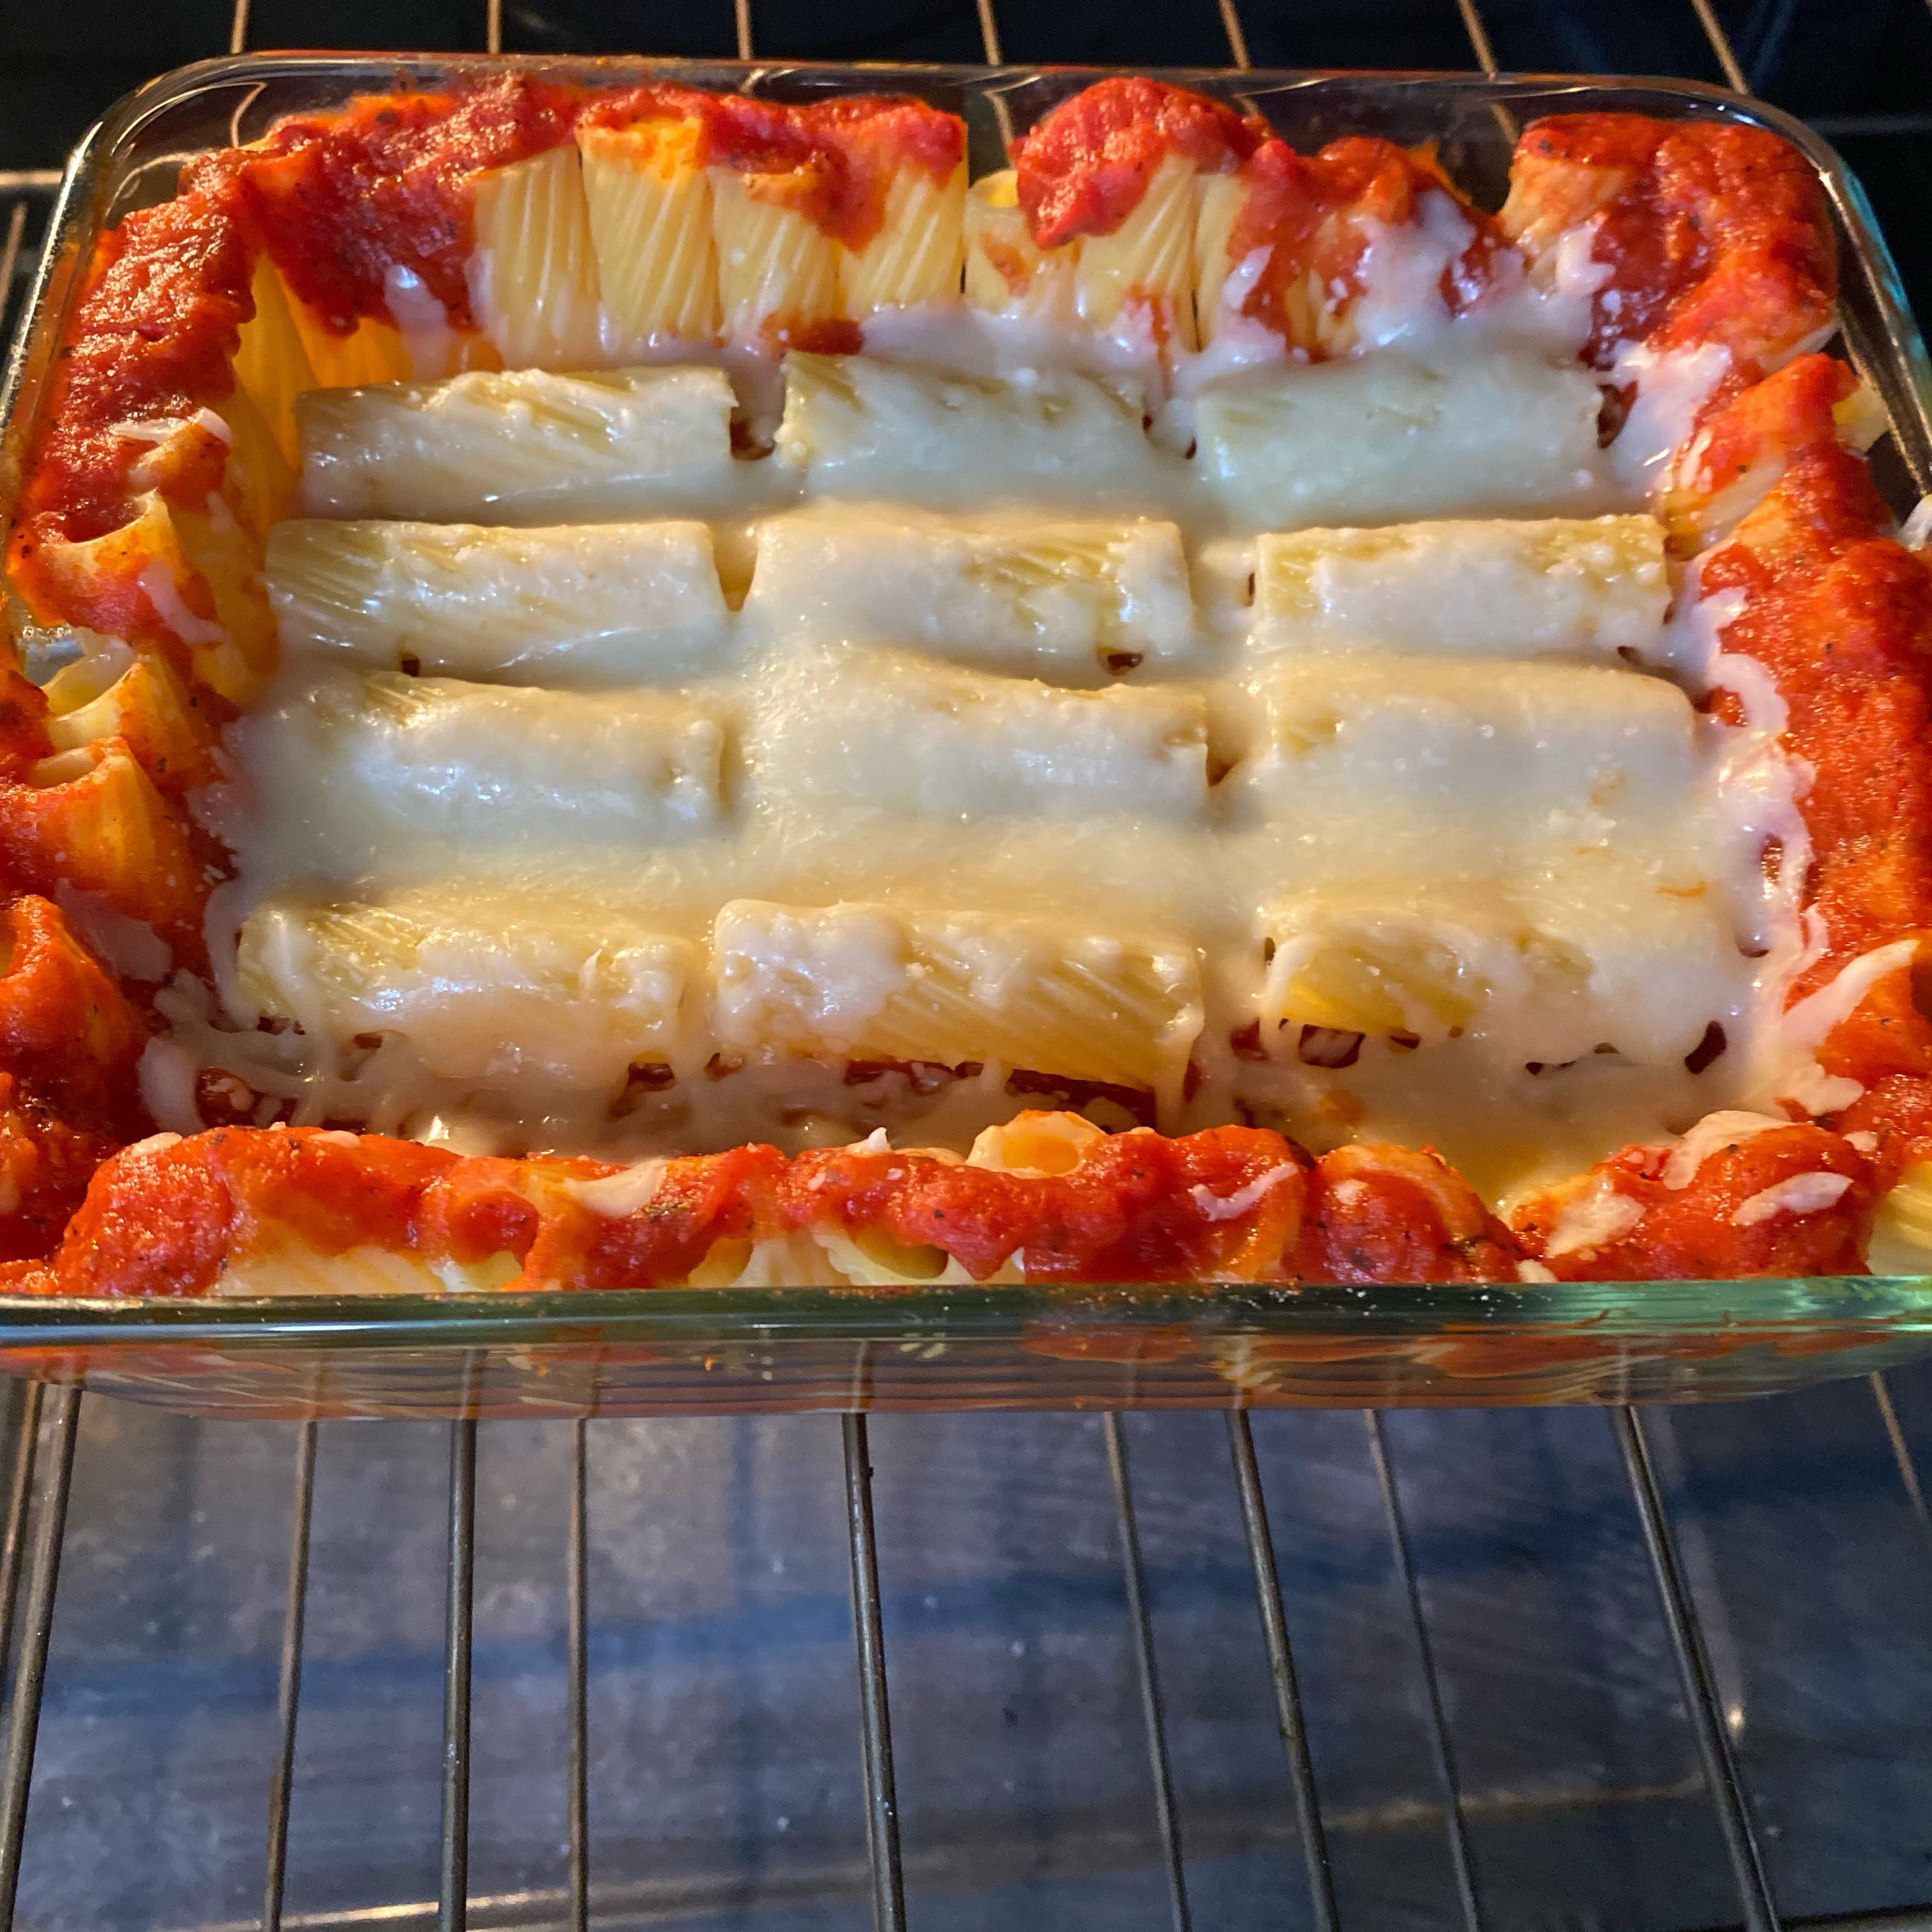 Then pre heat the oven to 400 degrees and put it in till it bubbles and all the cheese melts